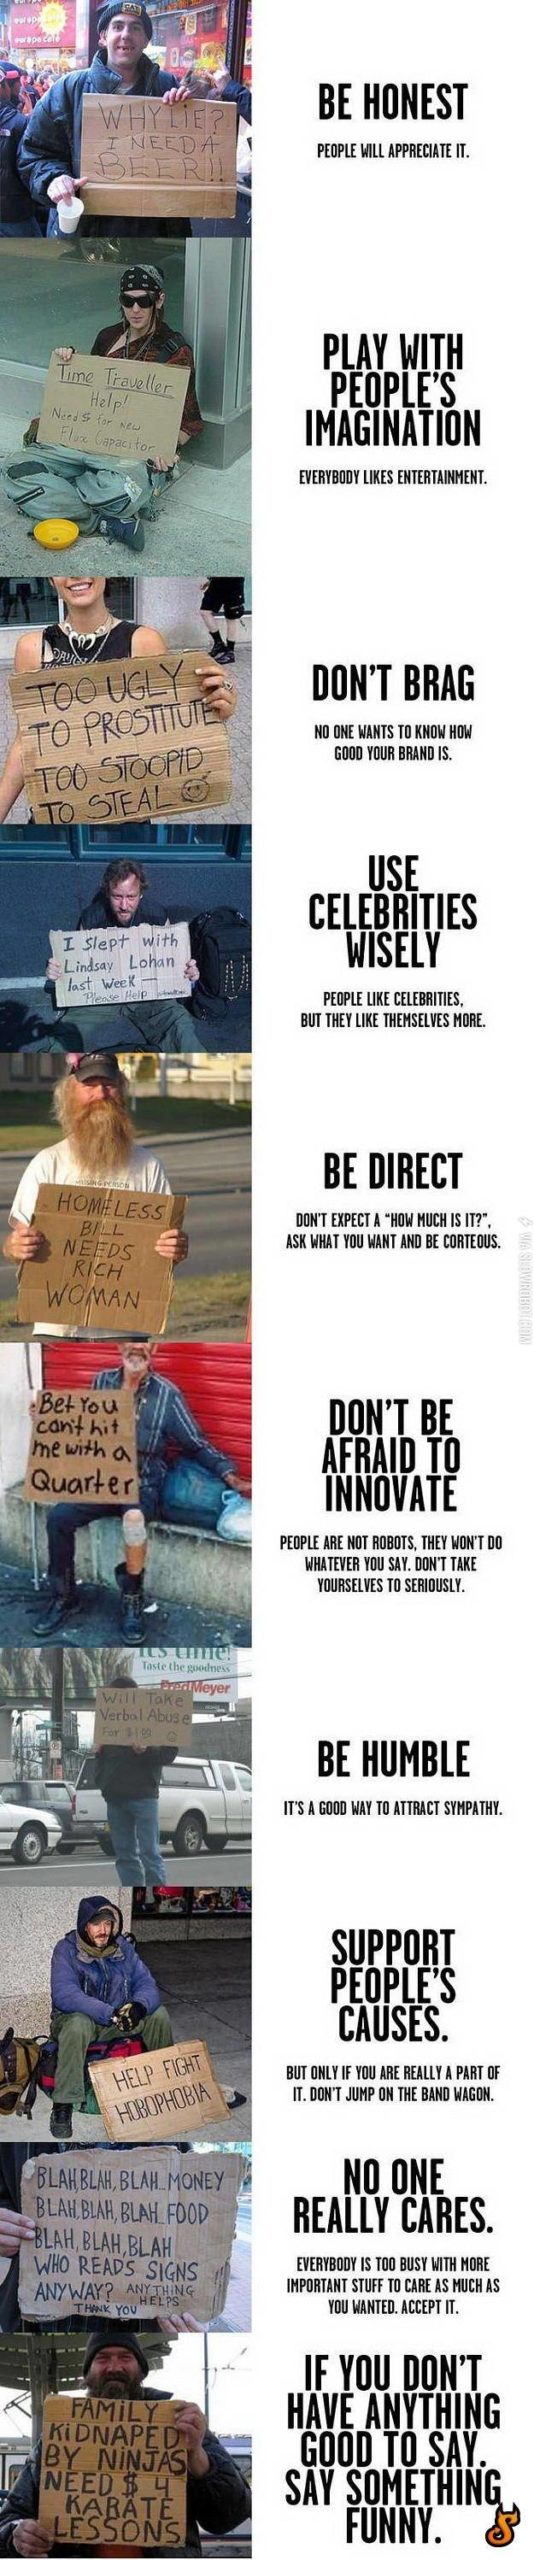 How+to+be+homeless.